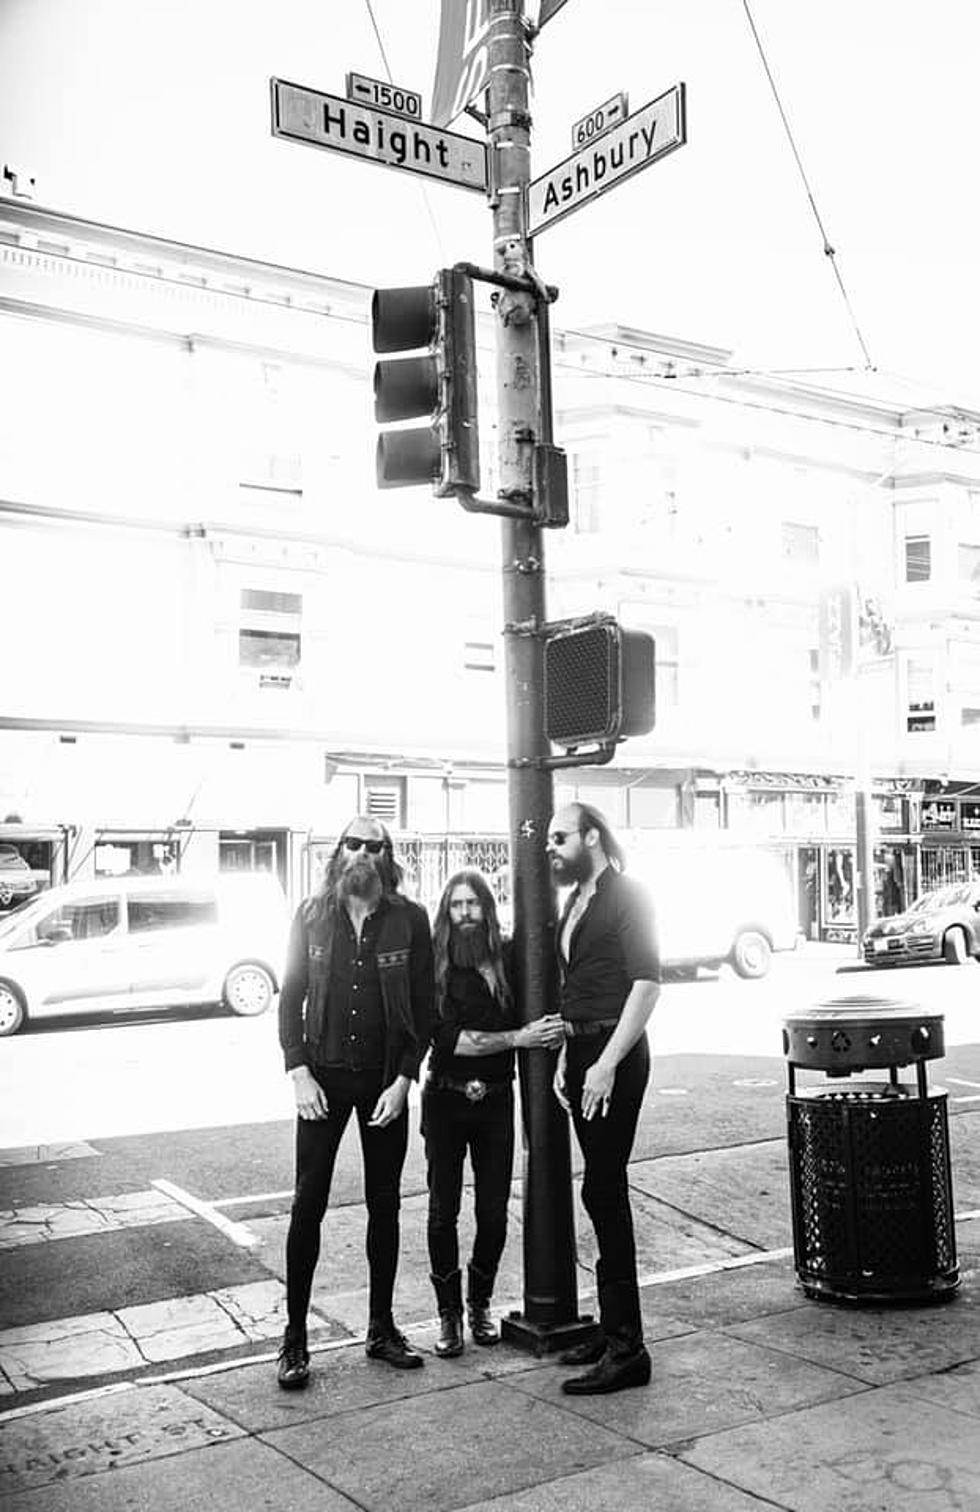 Kadavar prep new album, playing US shows with Ruby the Hatchet